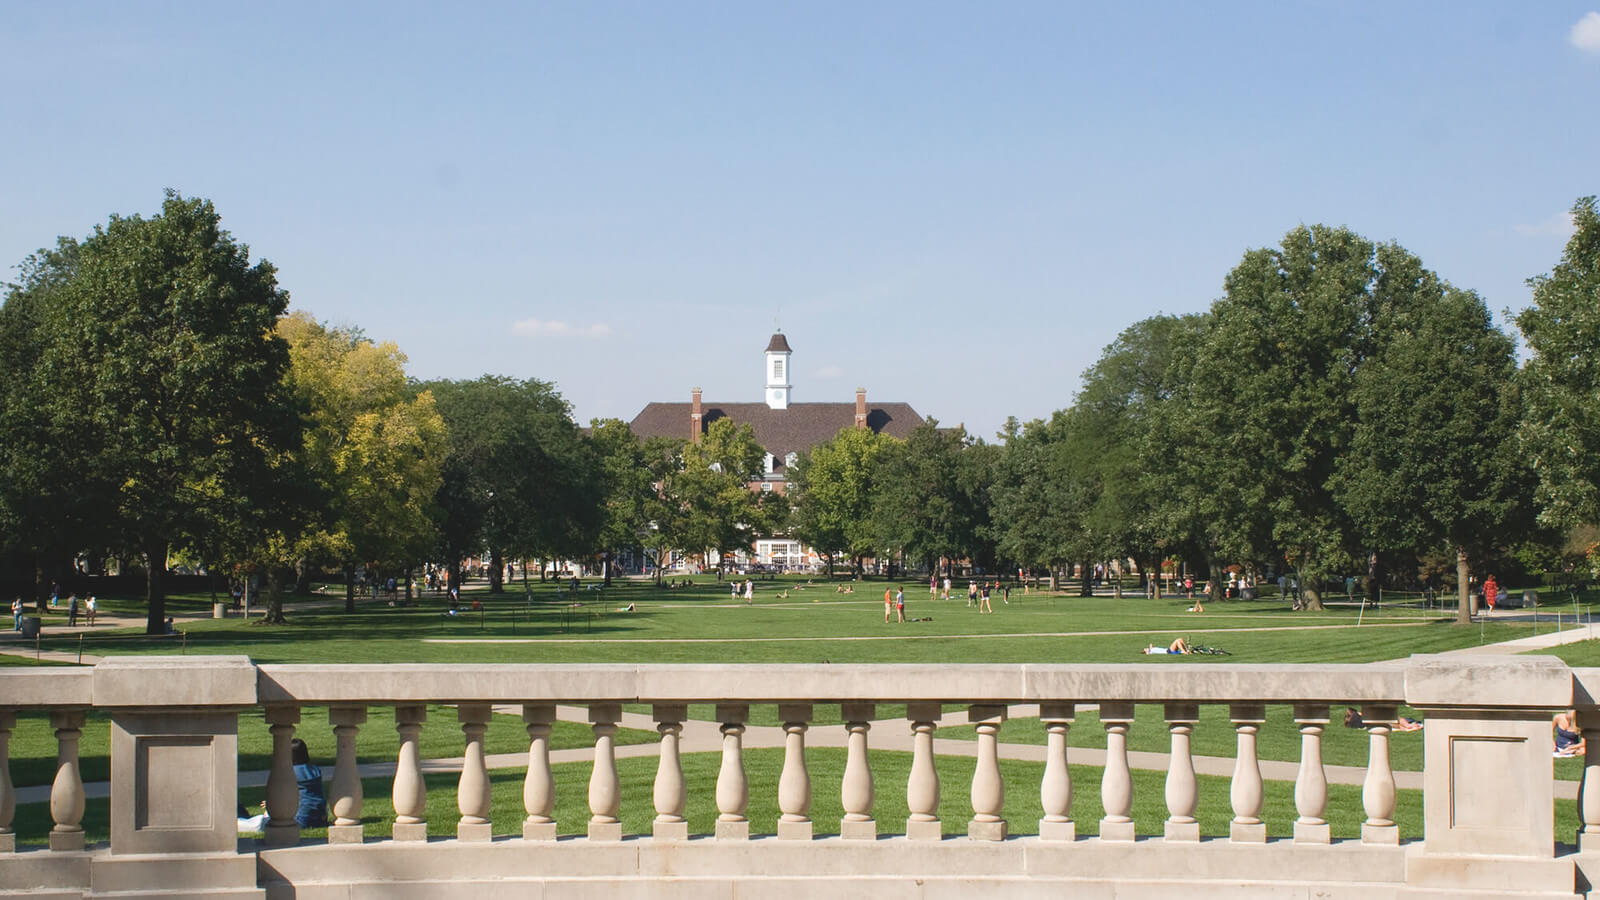 A college campus with wide grassy lawn